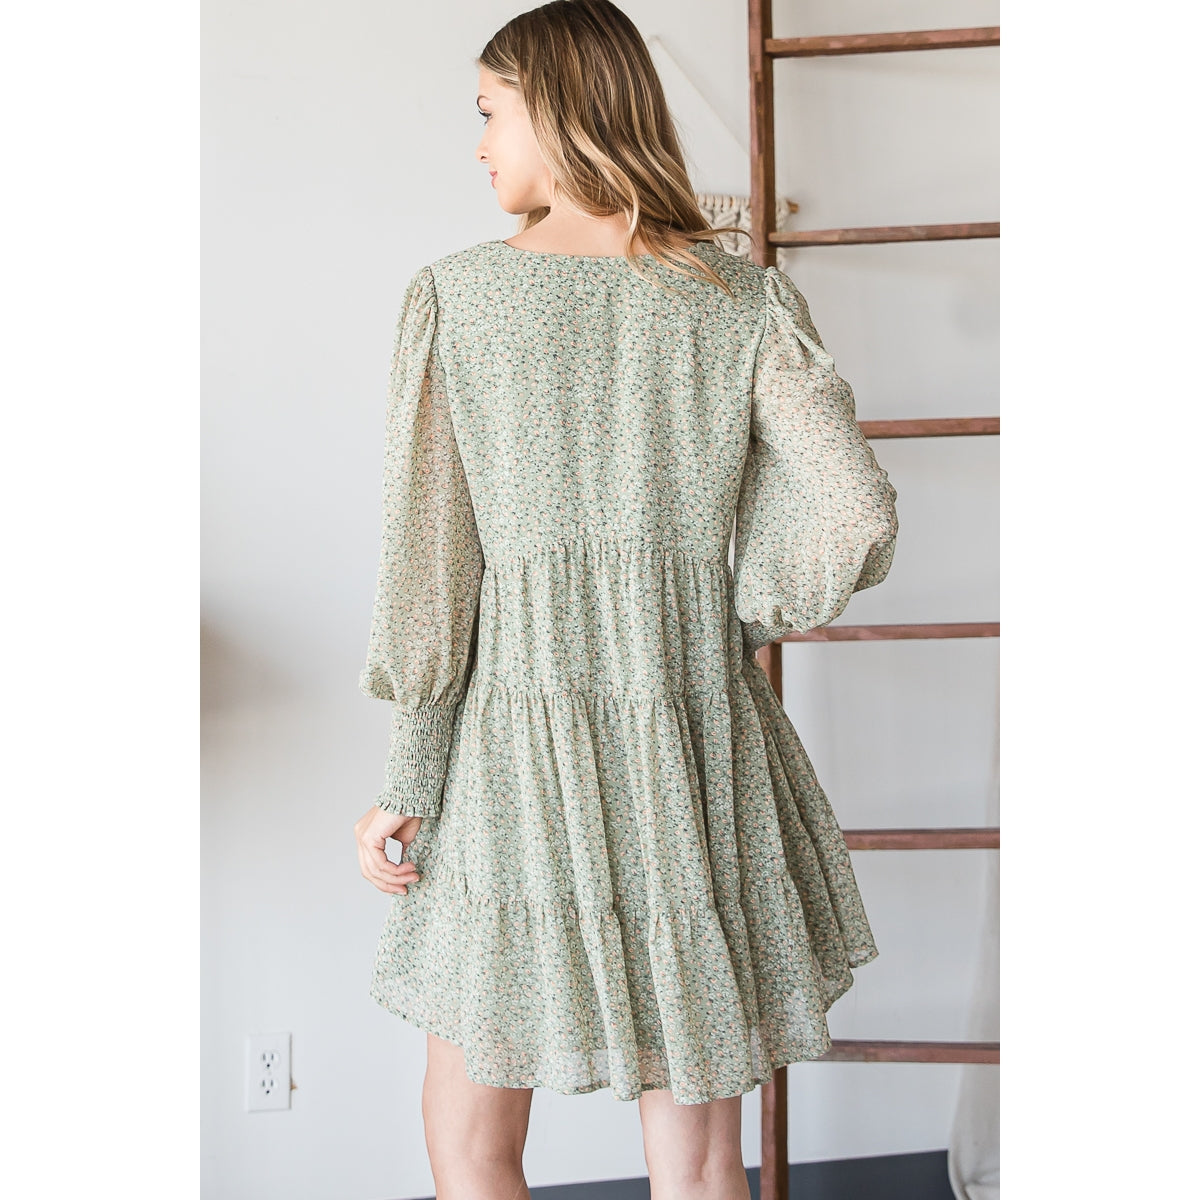 Sage Tiered Ruffle Floral Dress